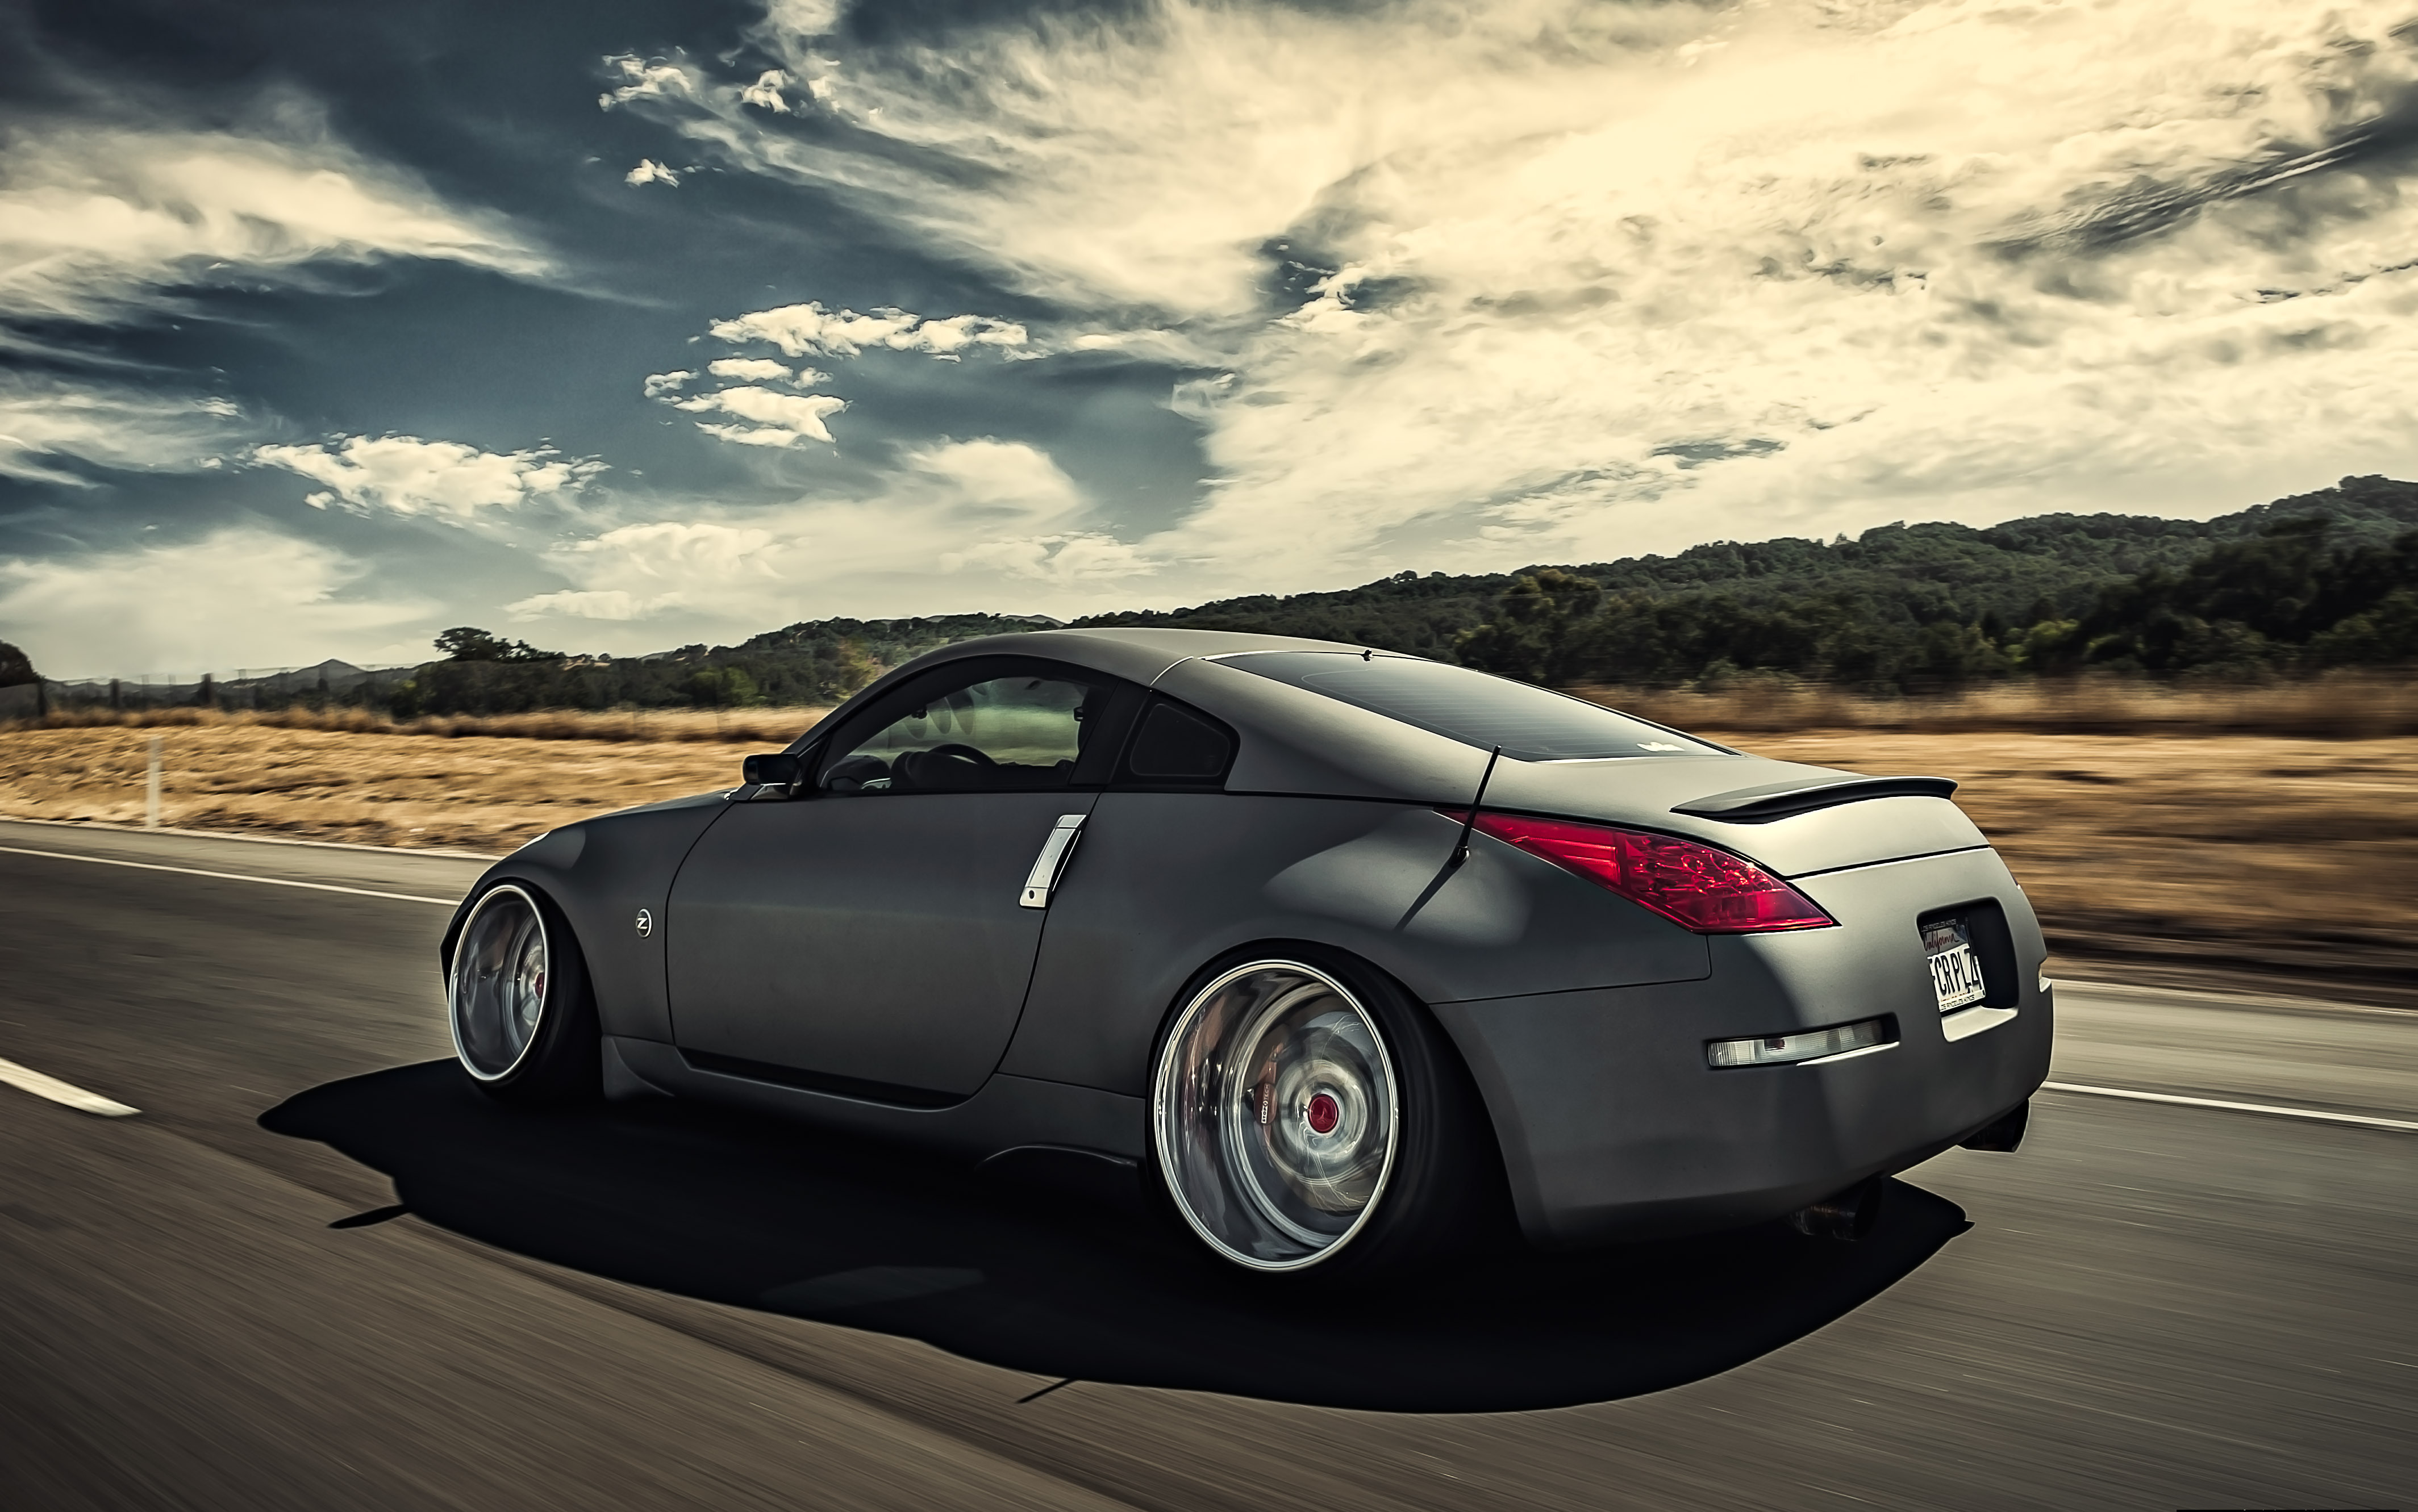 138906 download wallpaper cars, nissan, traffic, movement, side view, speed, stance, 350z screensavers and pictures for free